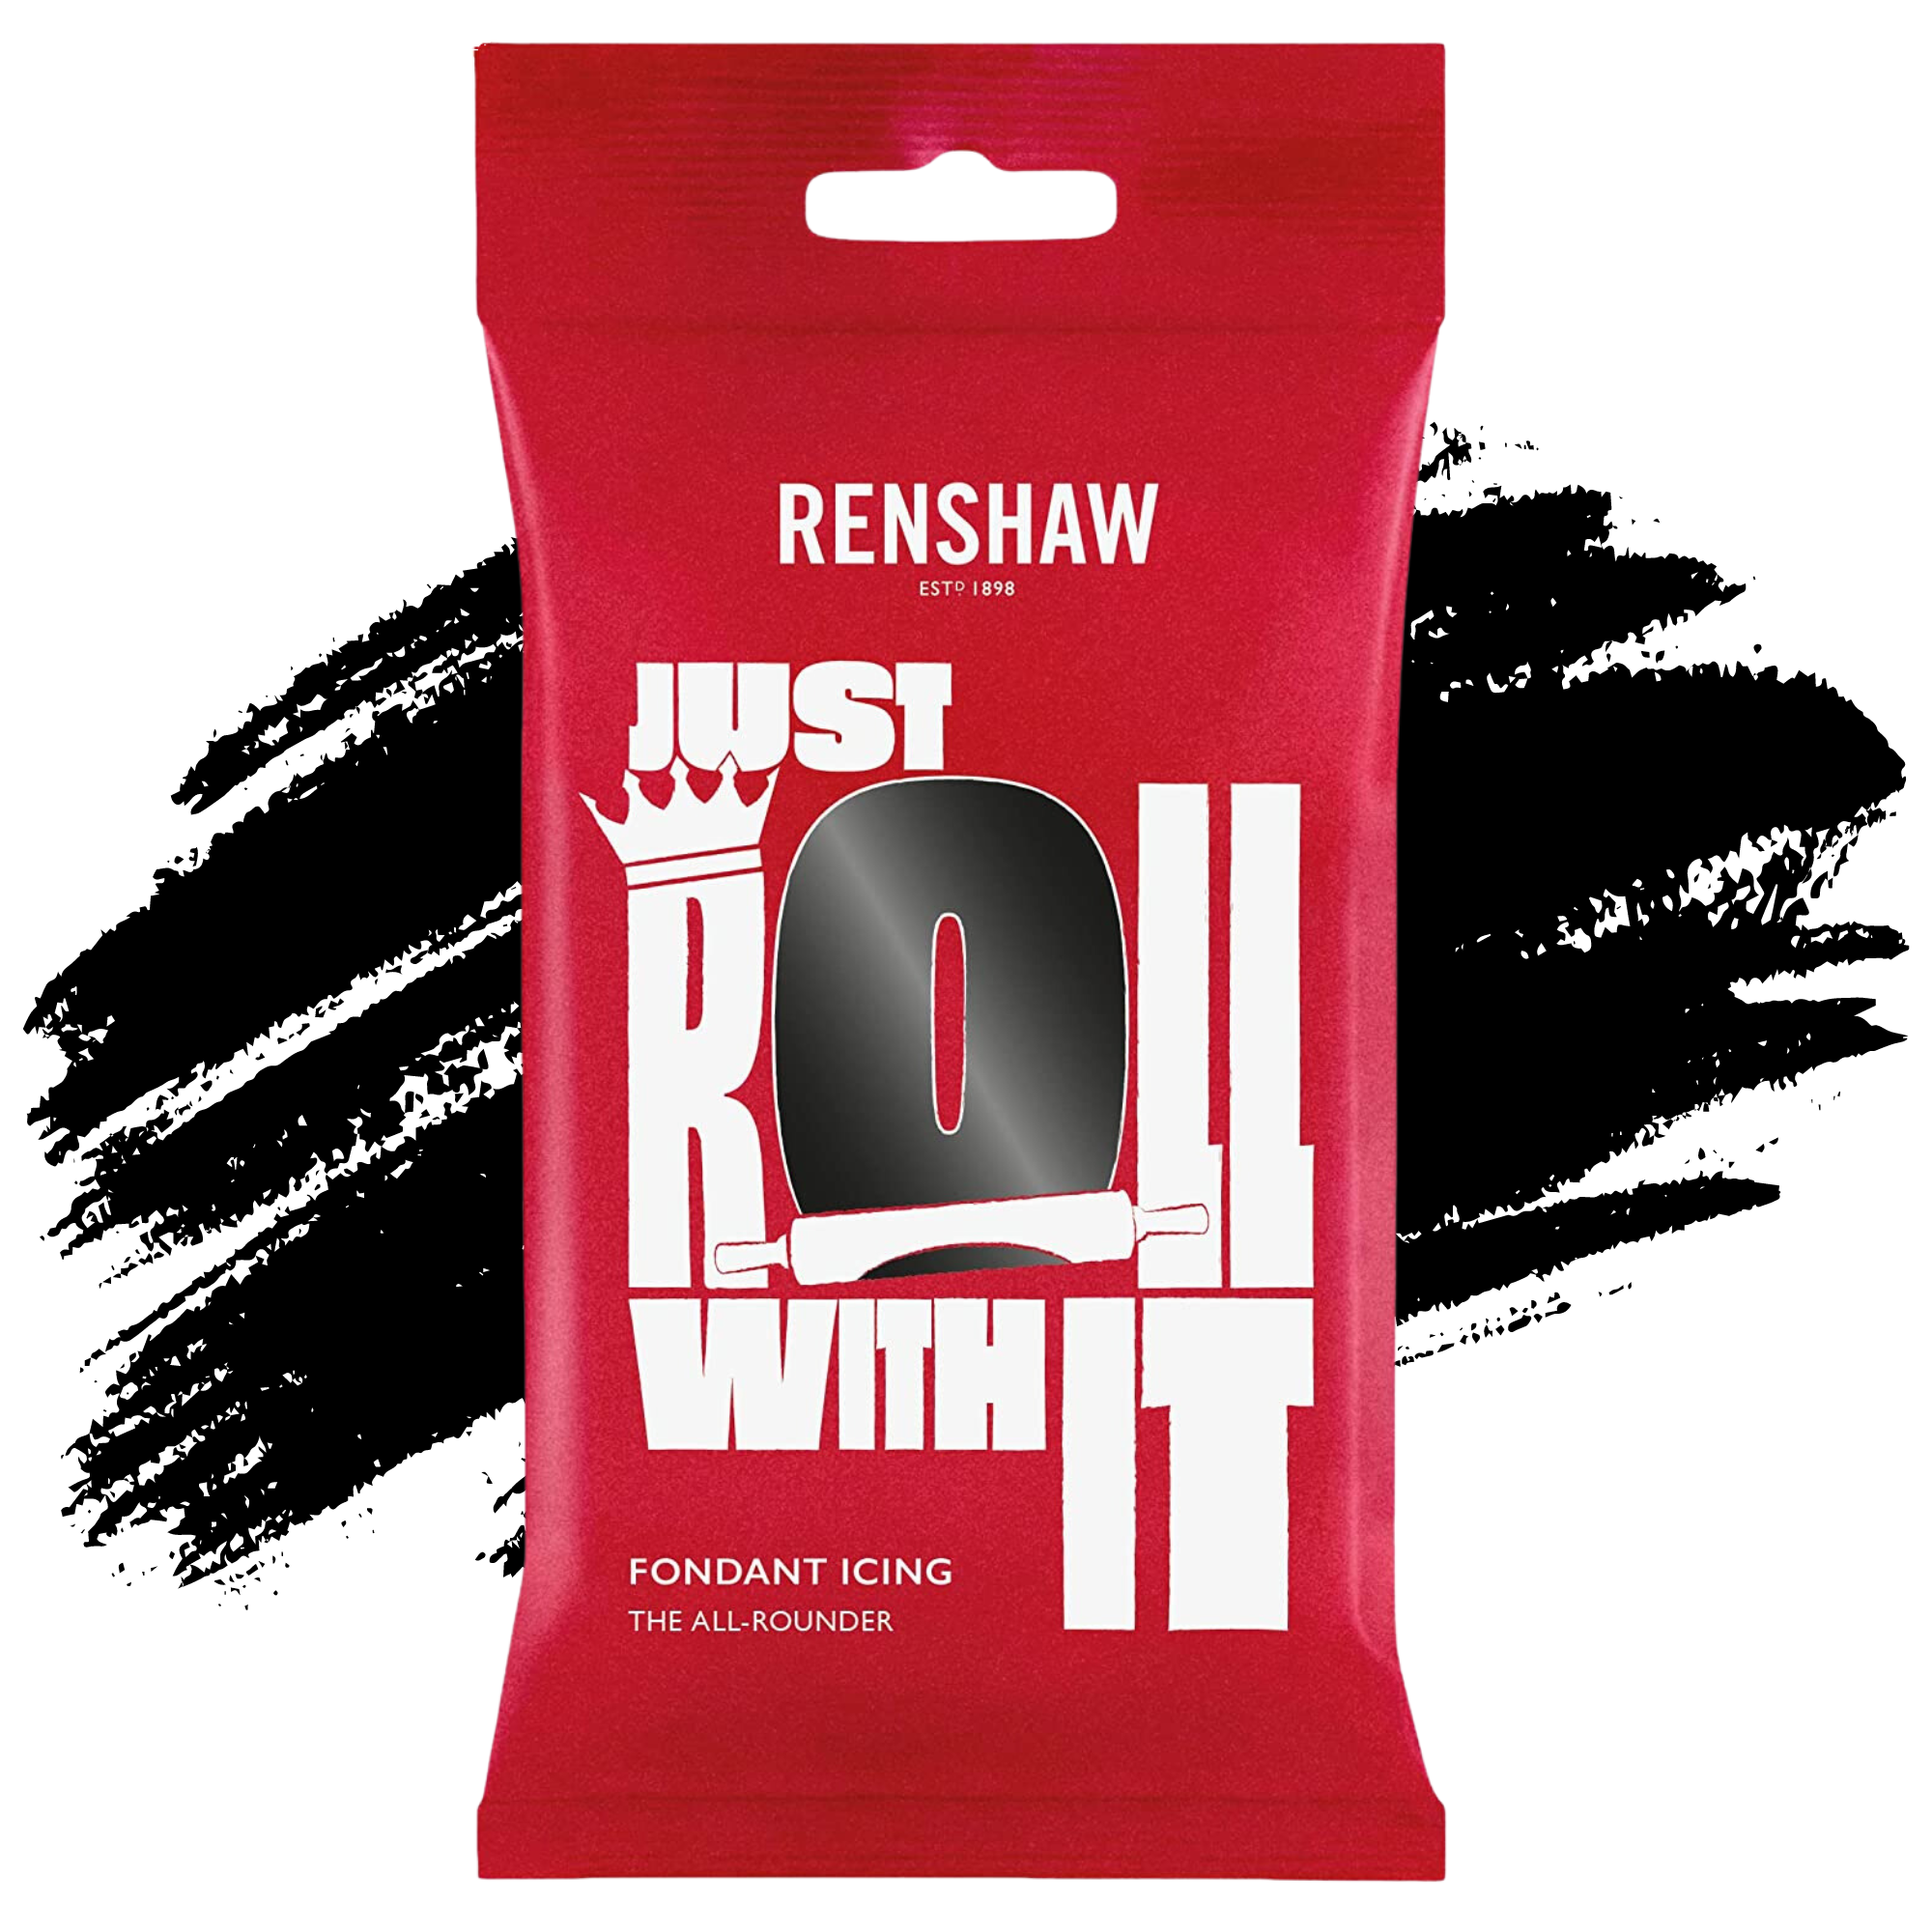 Renshaw Professional Sugar Paste Ready to Roll Fondant Just Roll with it Icing - Black - 250g